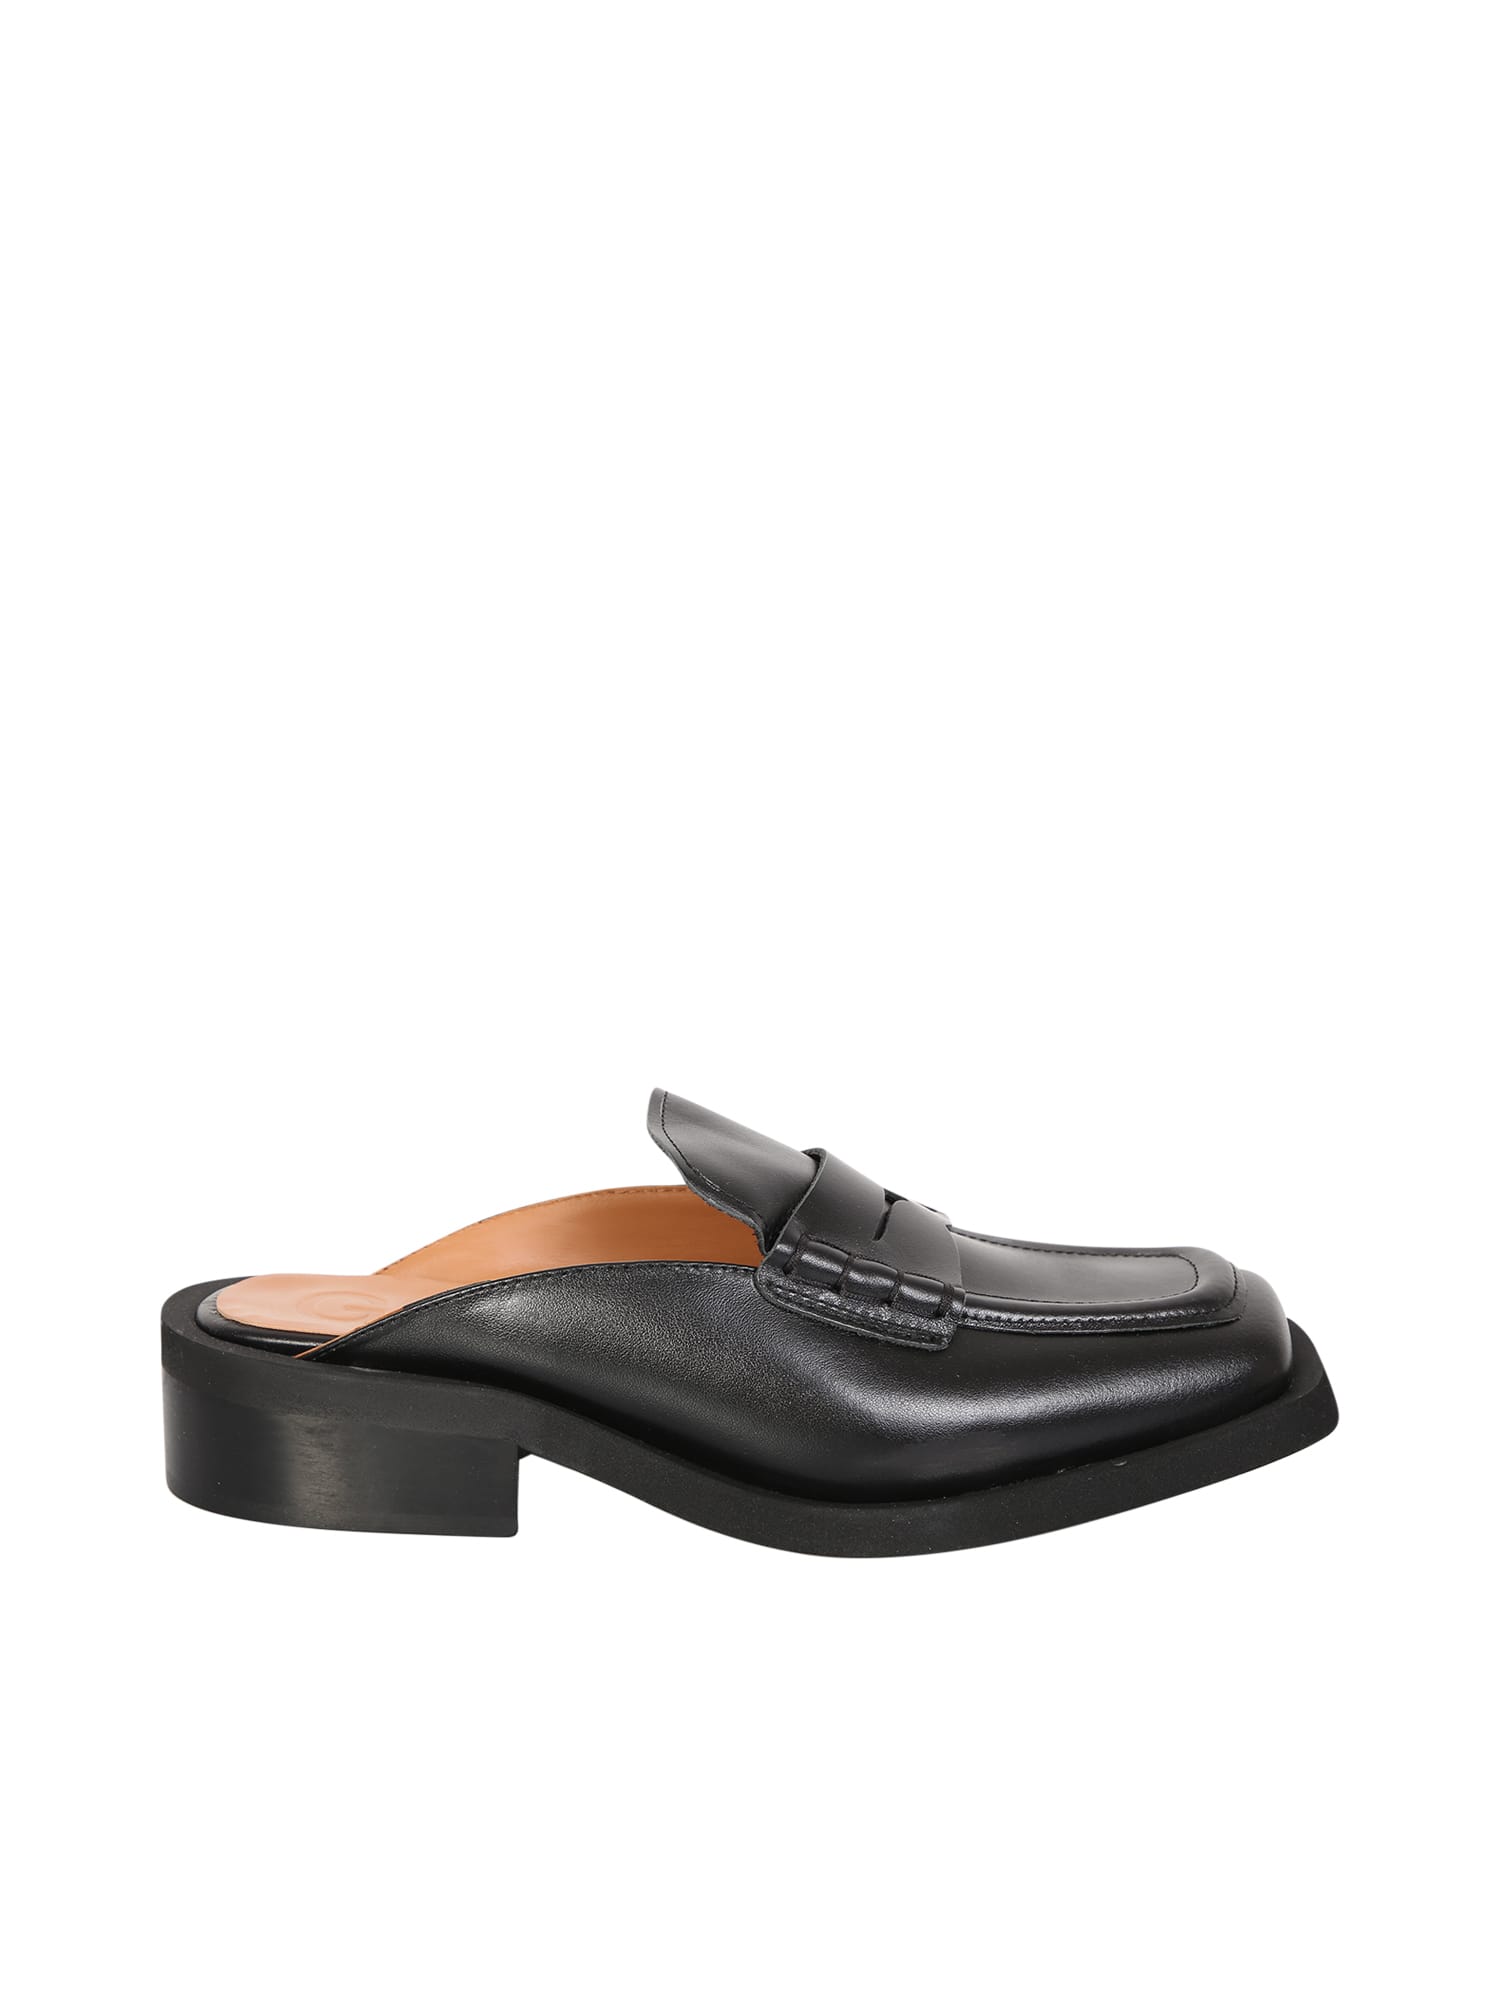 Ganni Casual And Elegant: Gannis Square Toe Loafers